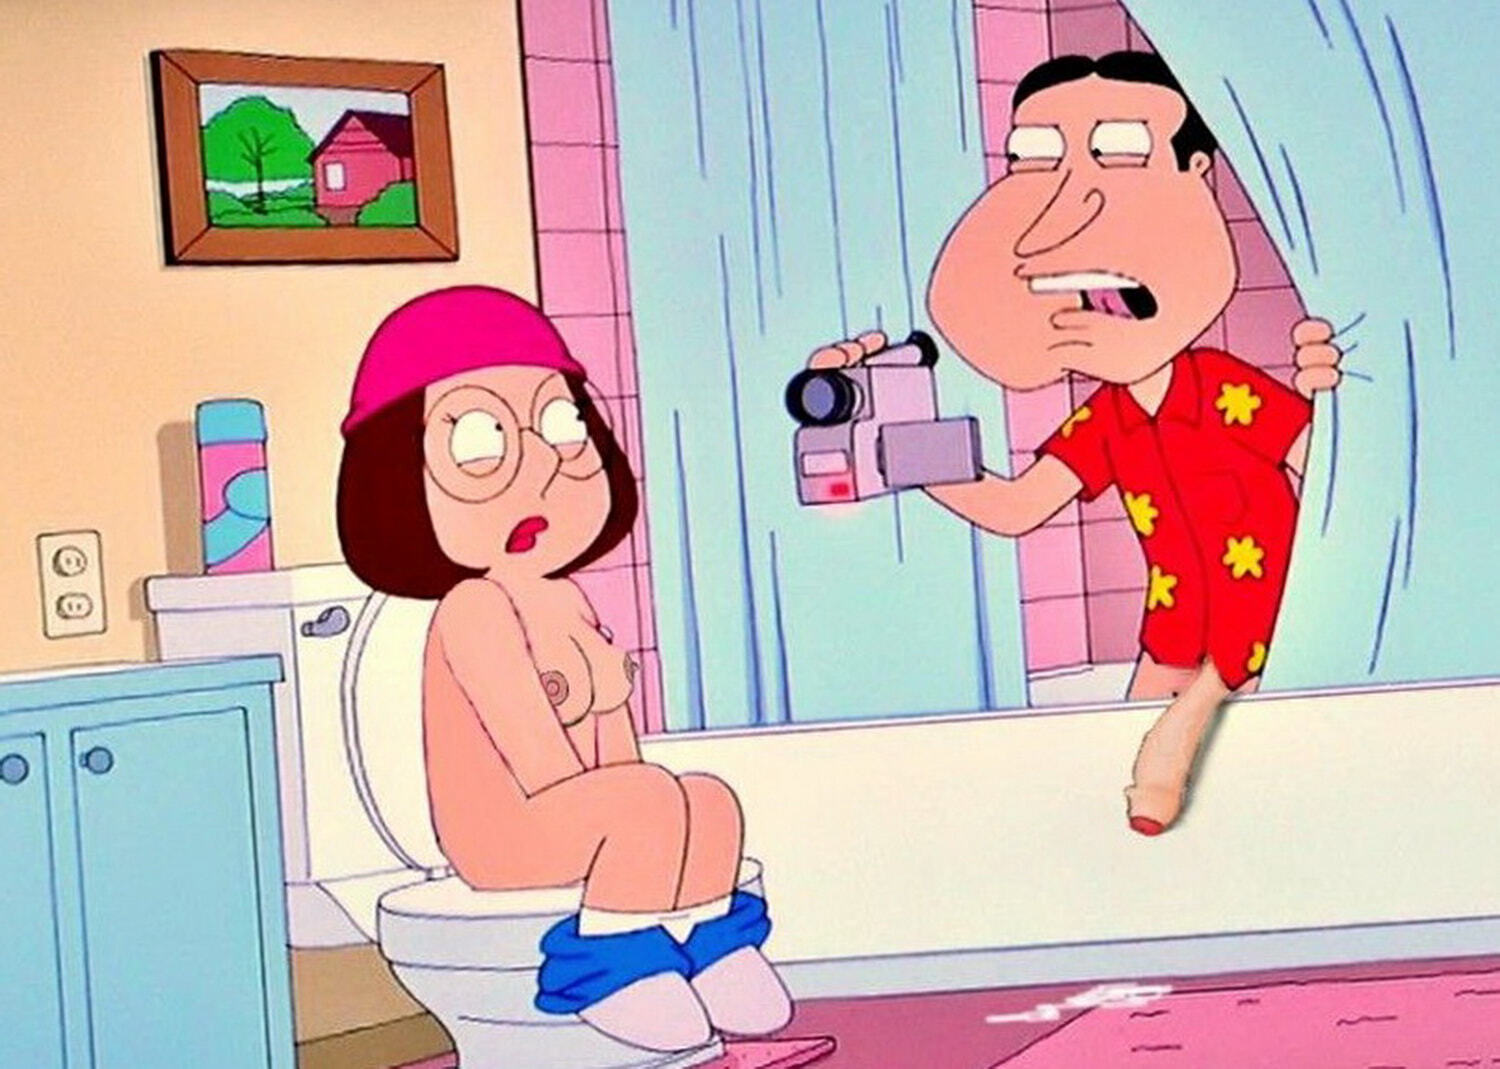 Family Guy pics tagged as hentai, rule 34, sex. 